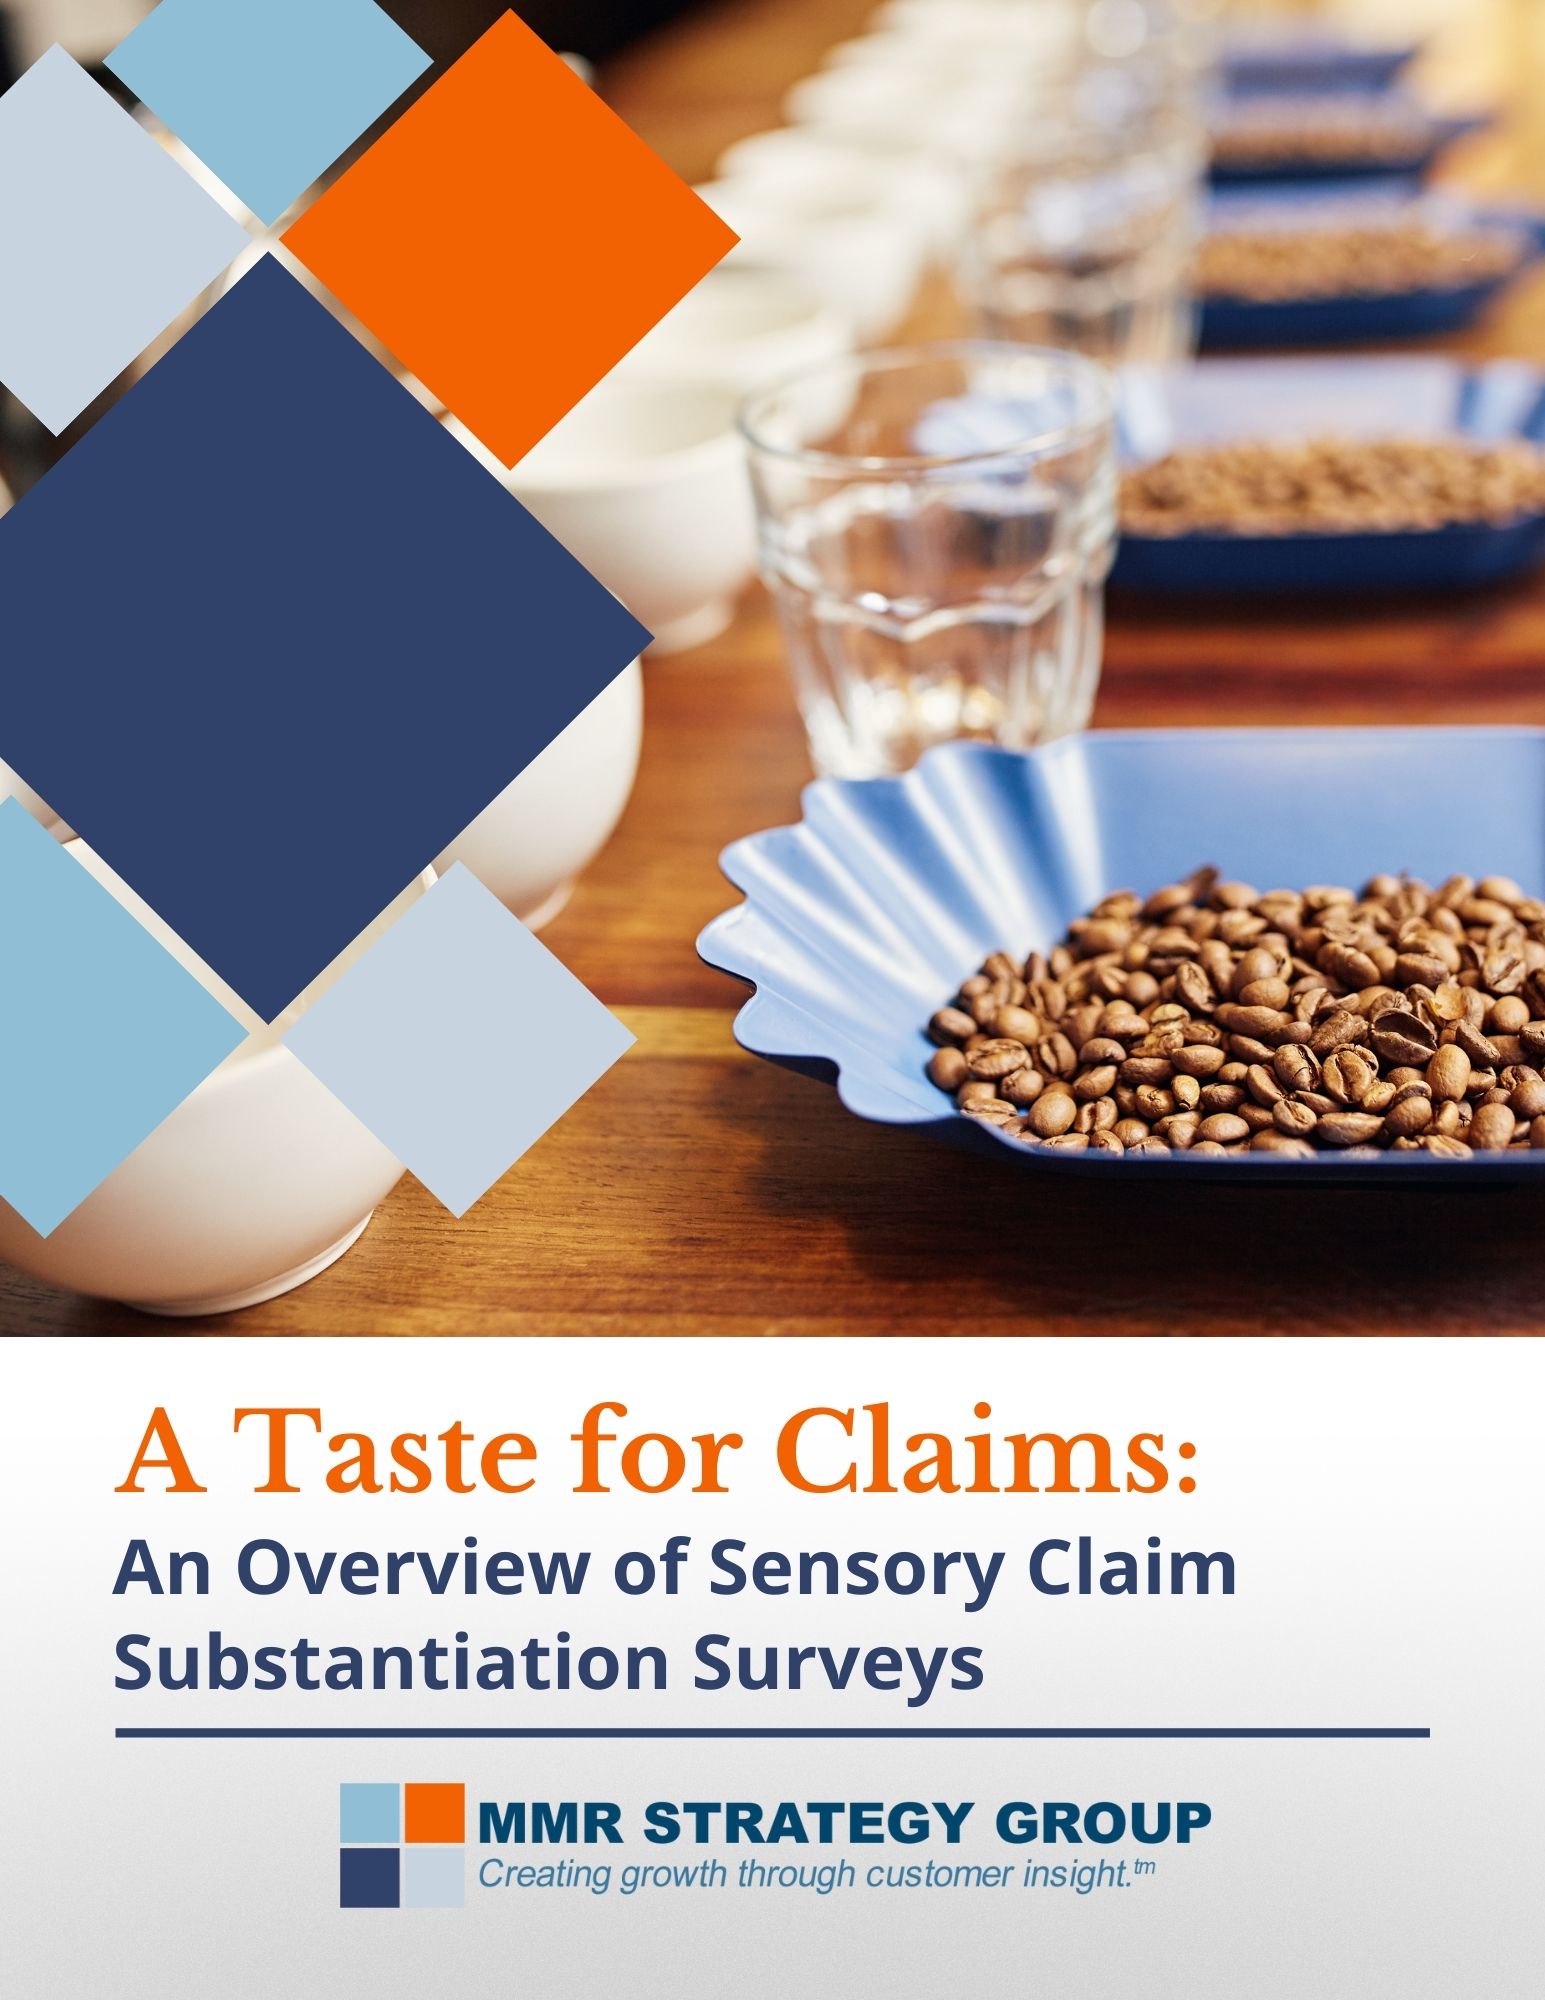 A Taste for Claims: An Overview of Sensory Claim Substantiation Surveys